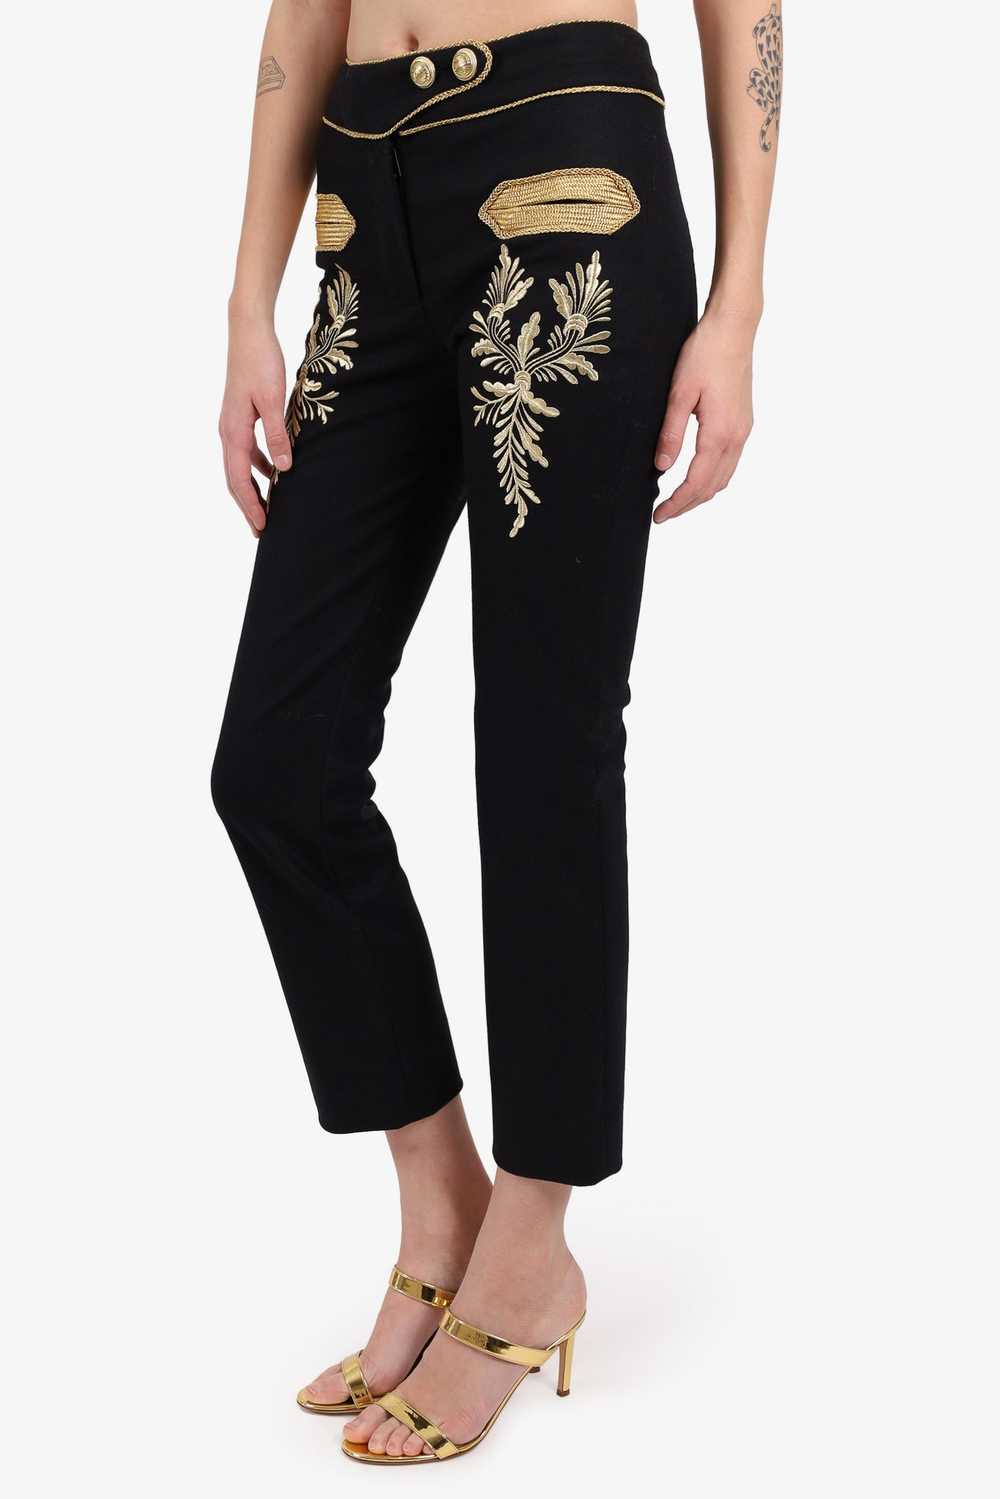 Paco Rabanne Black Wool Gold Embroidered Pants Si… - image 2